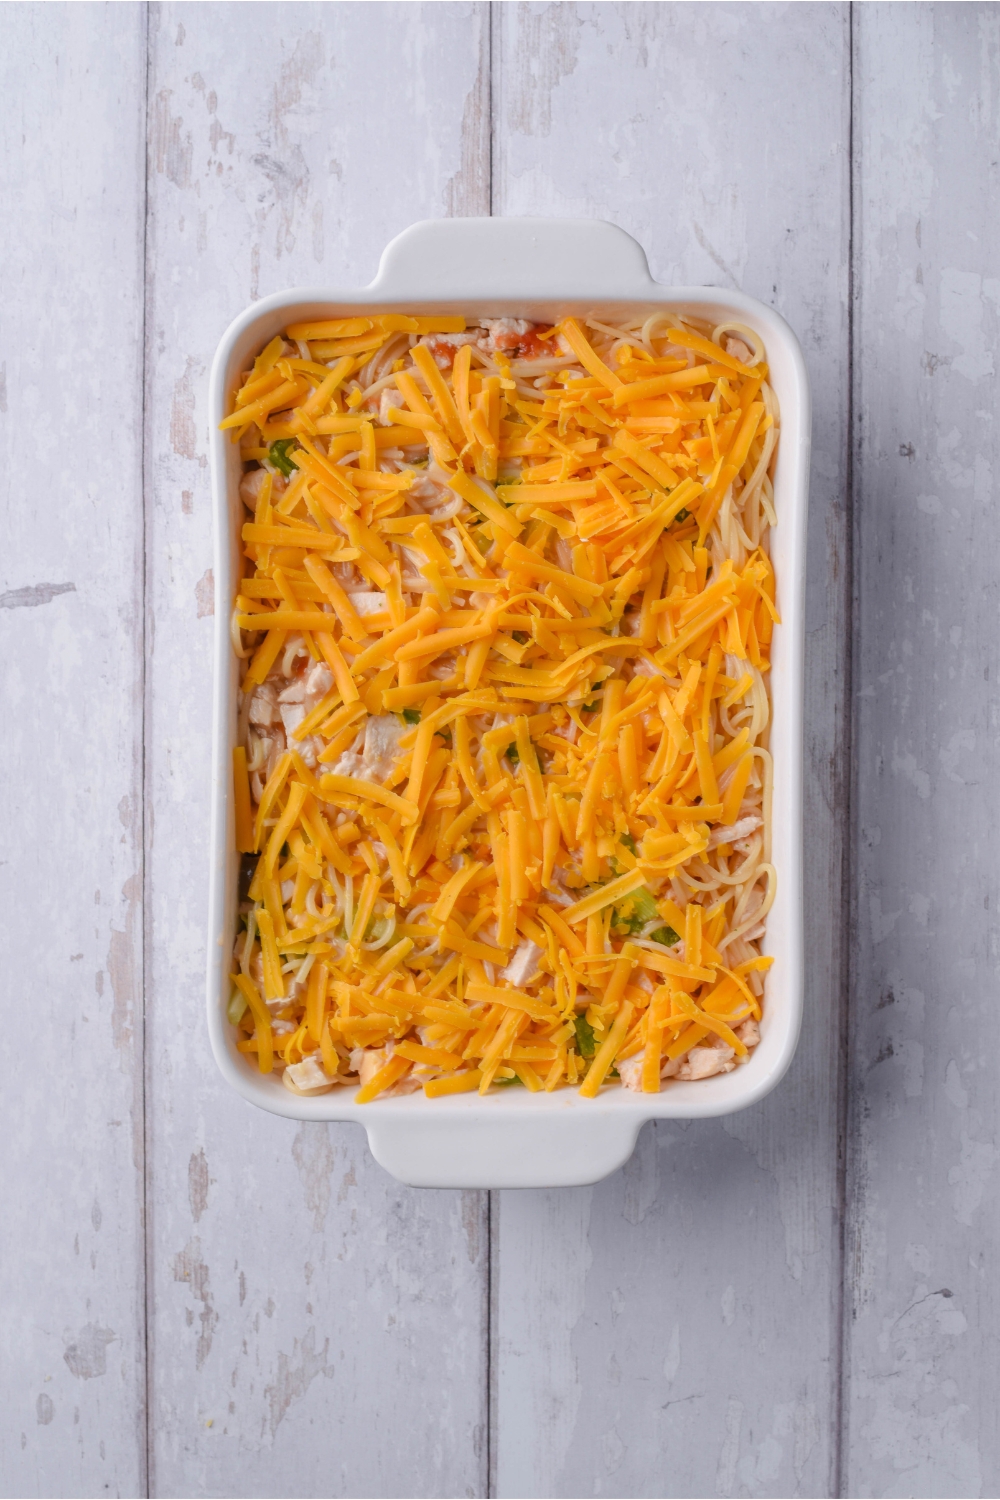 An unbaked chicken spaghetti casserole covered in shredded cheese in a white baking dish.